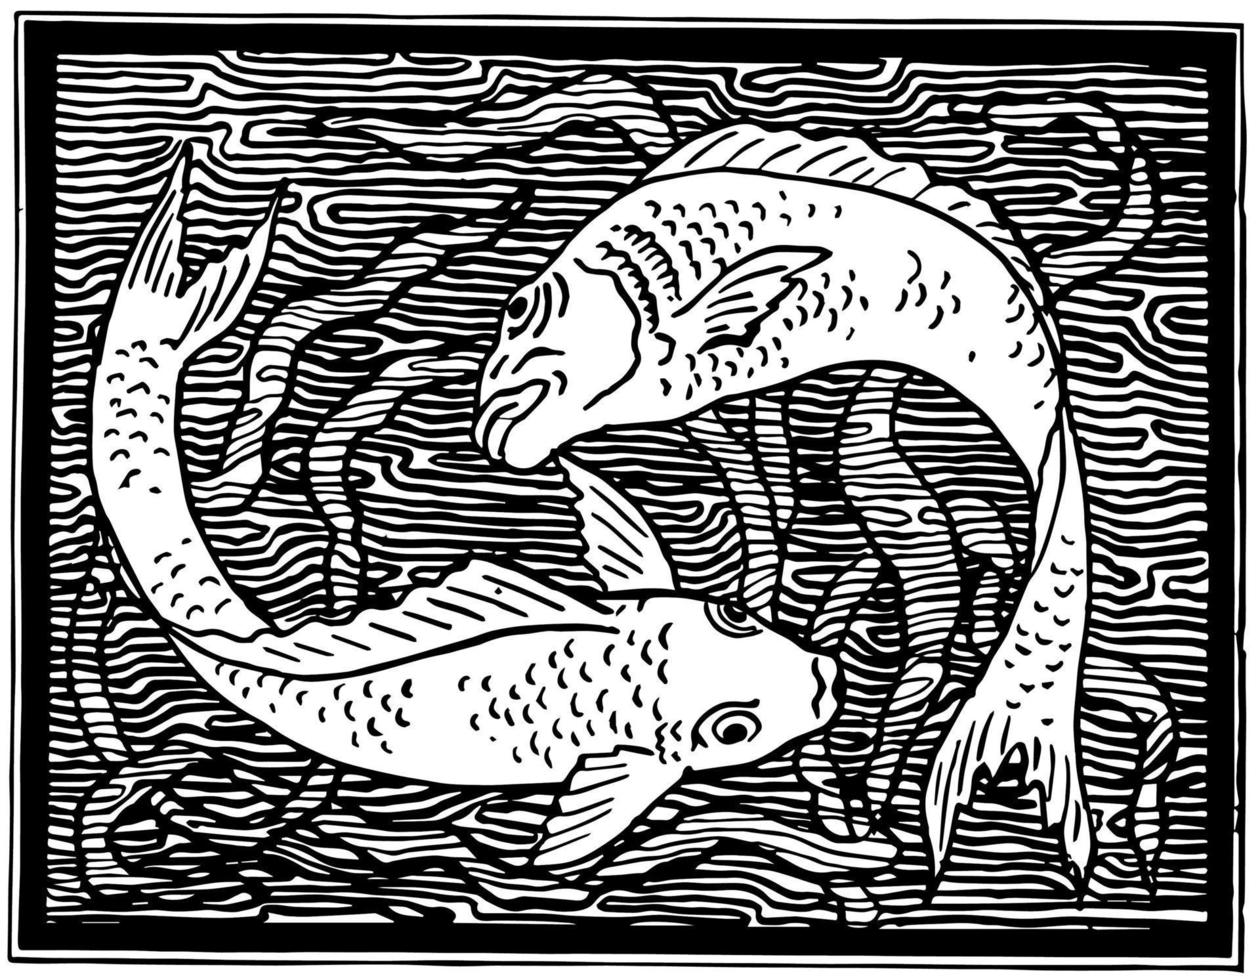 Fish Design is a natural form in under the water, vintage engraving. vector